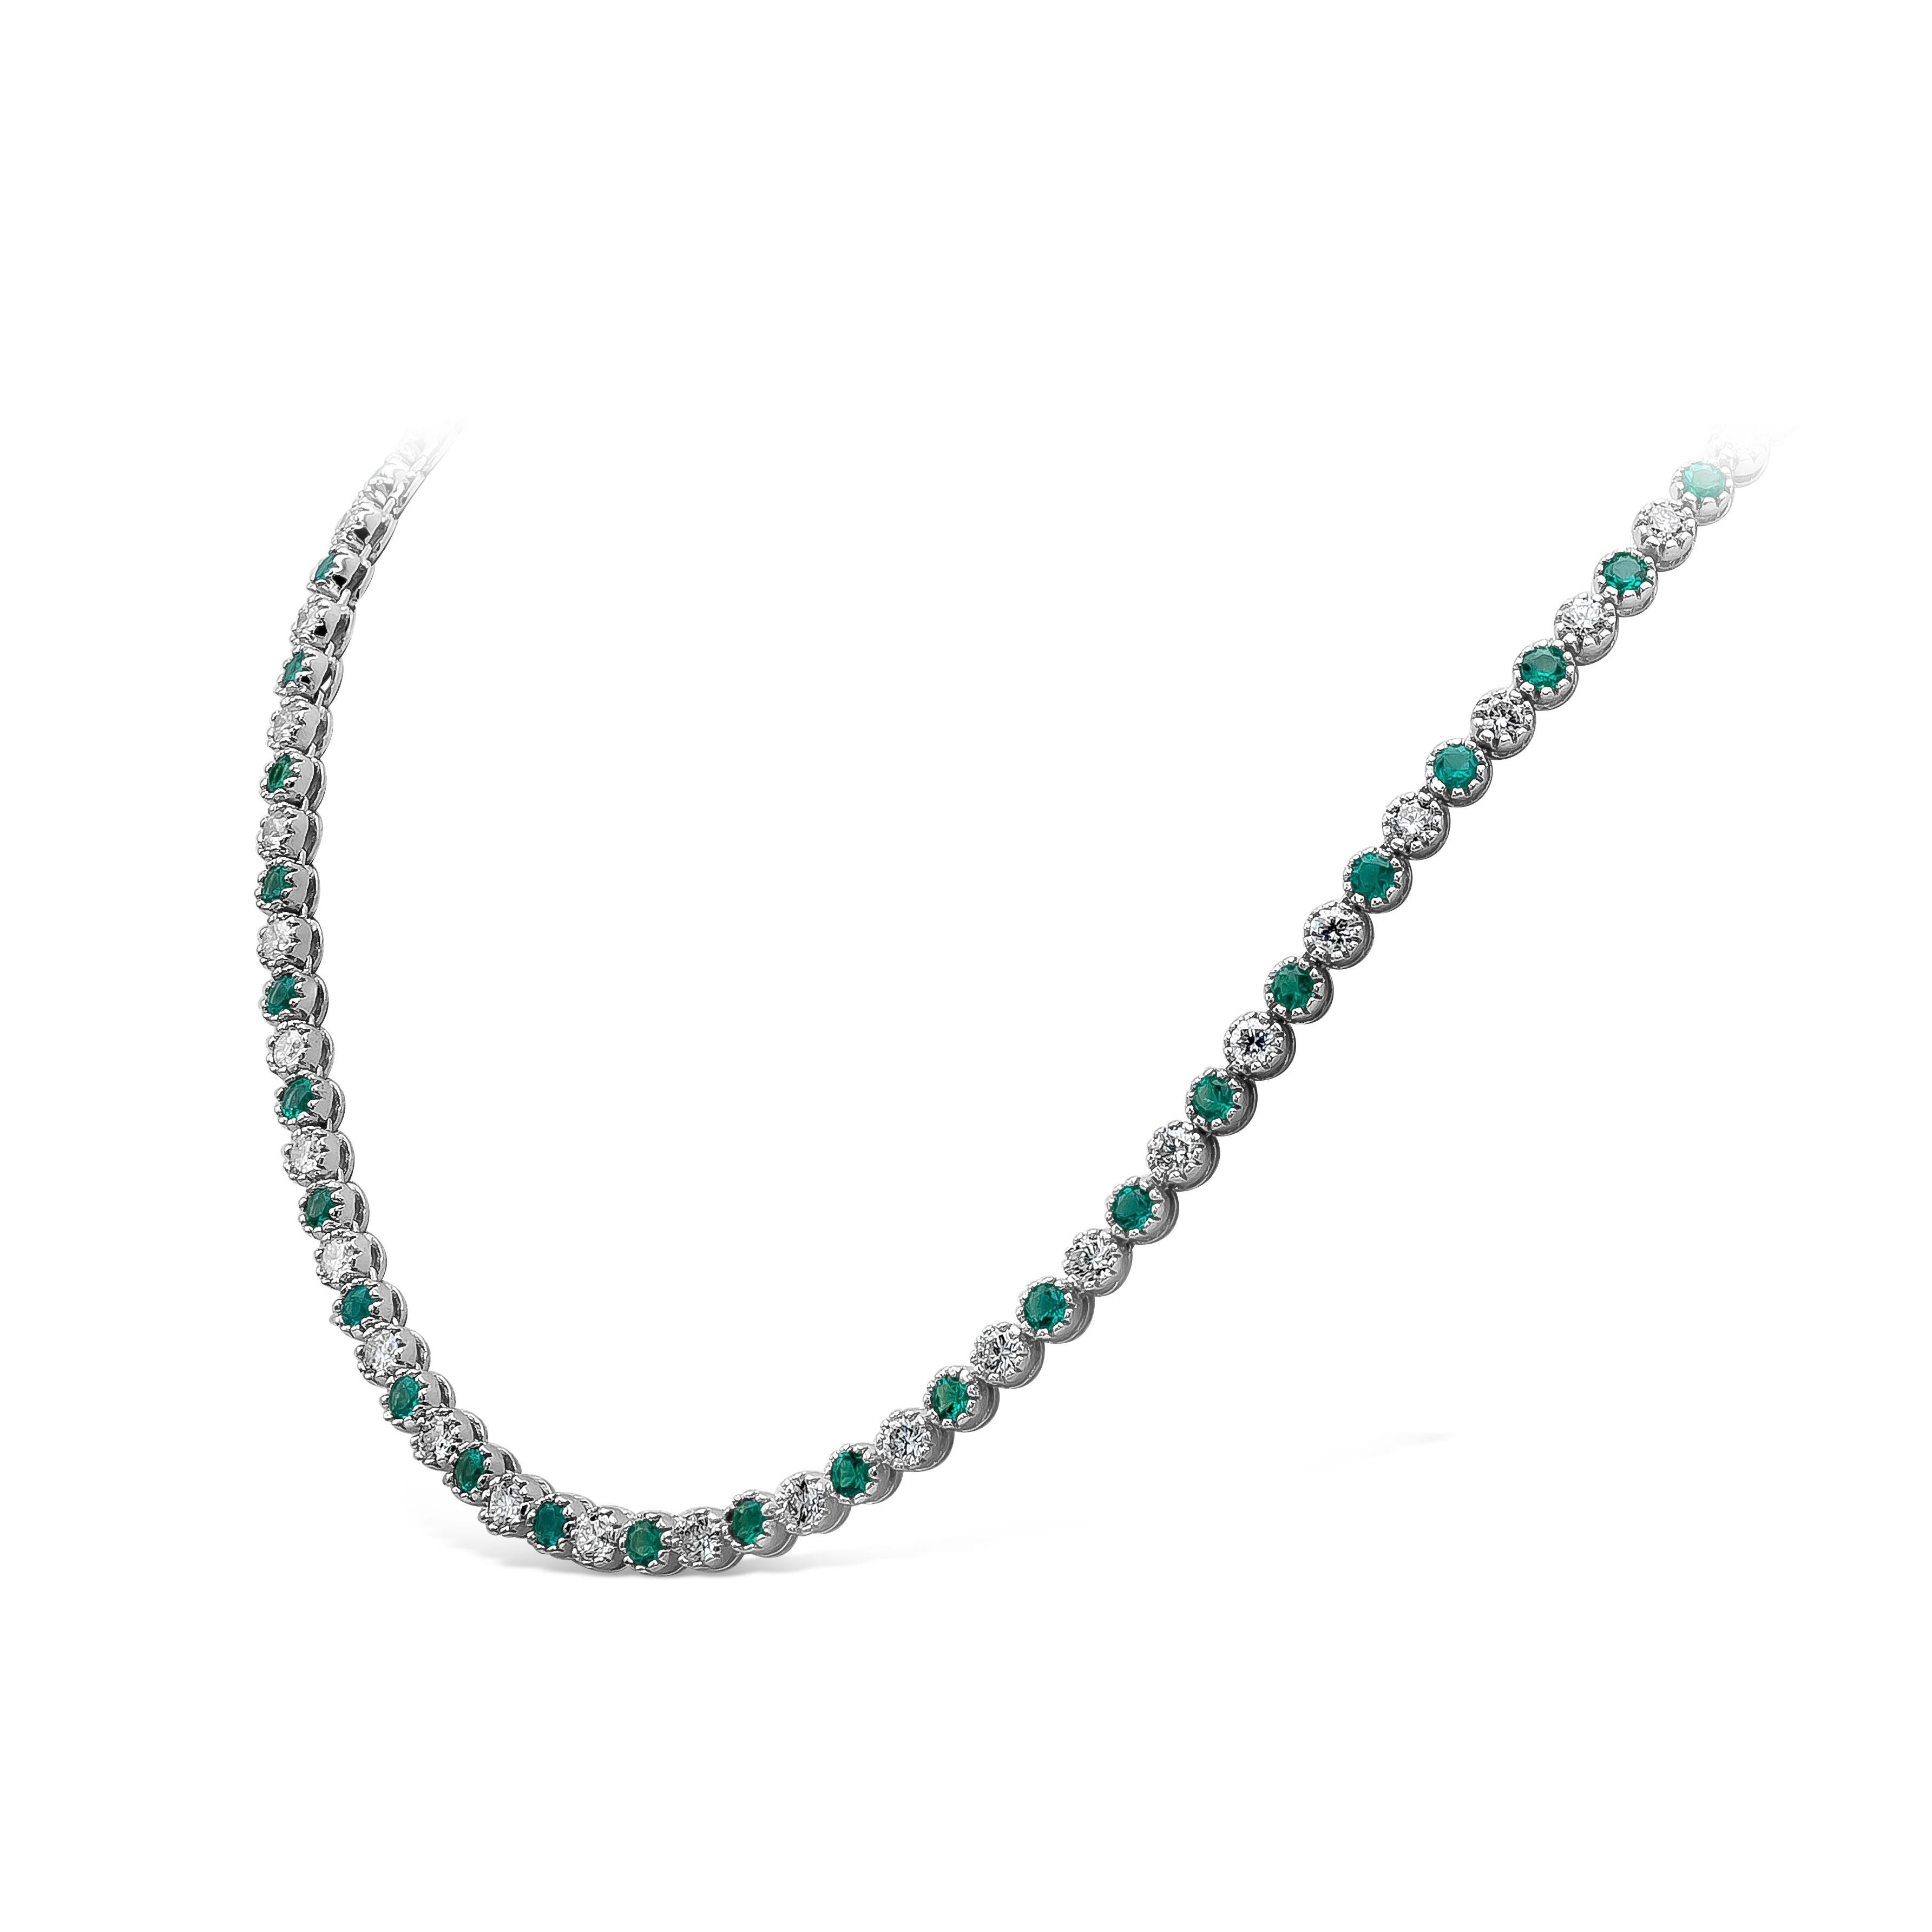 A beautifully crafted and refined tennis necklace, featuring vibrant green emeralds weighing 5.39 carats total alternating with round brilliant diamonds weighing 6.43 carats total with F-G color and SI1 clarity. Set on 18K white gold and 16.75